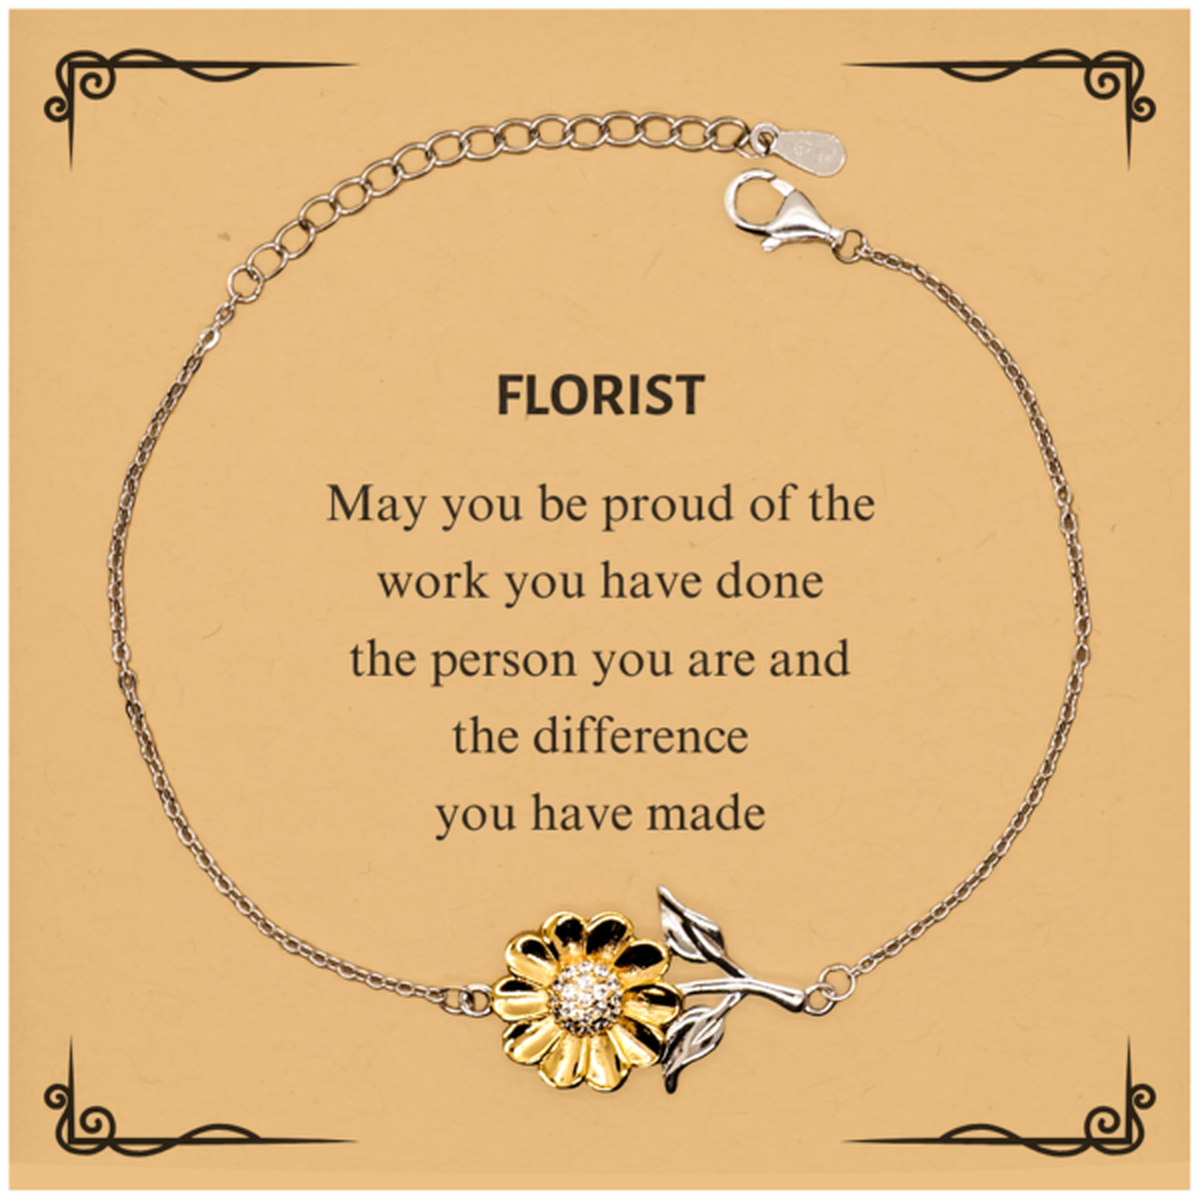 Florist May you be proud of the work you have done, Retirement Florist Sunflower Bracelet for Colleague Appreciation Gifts Amazing for Florist